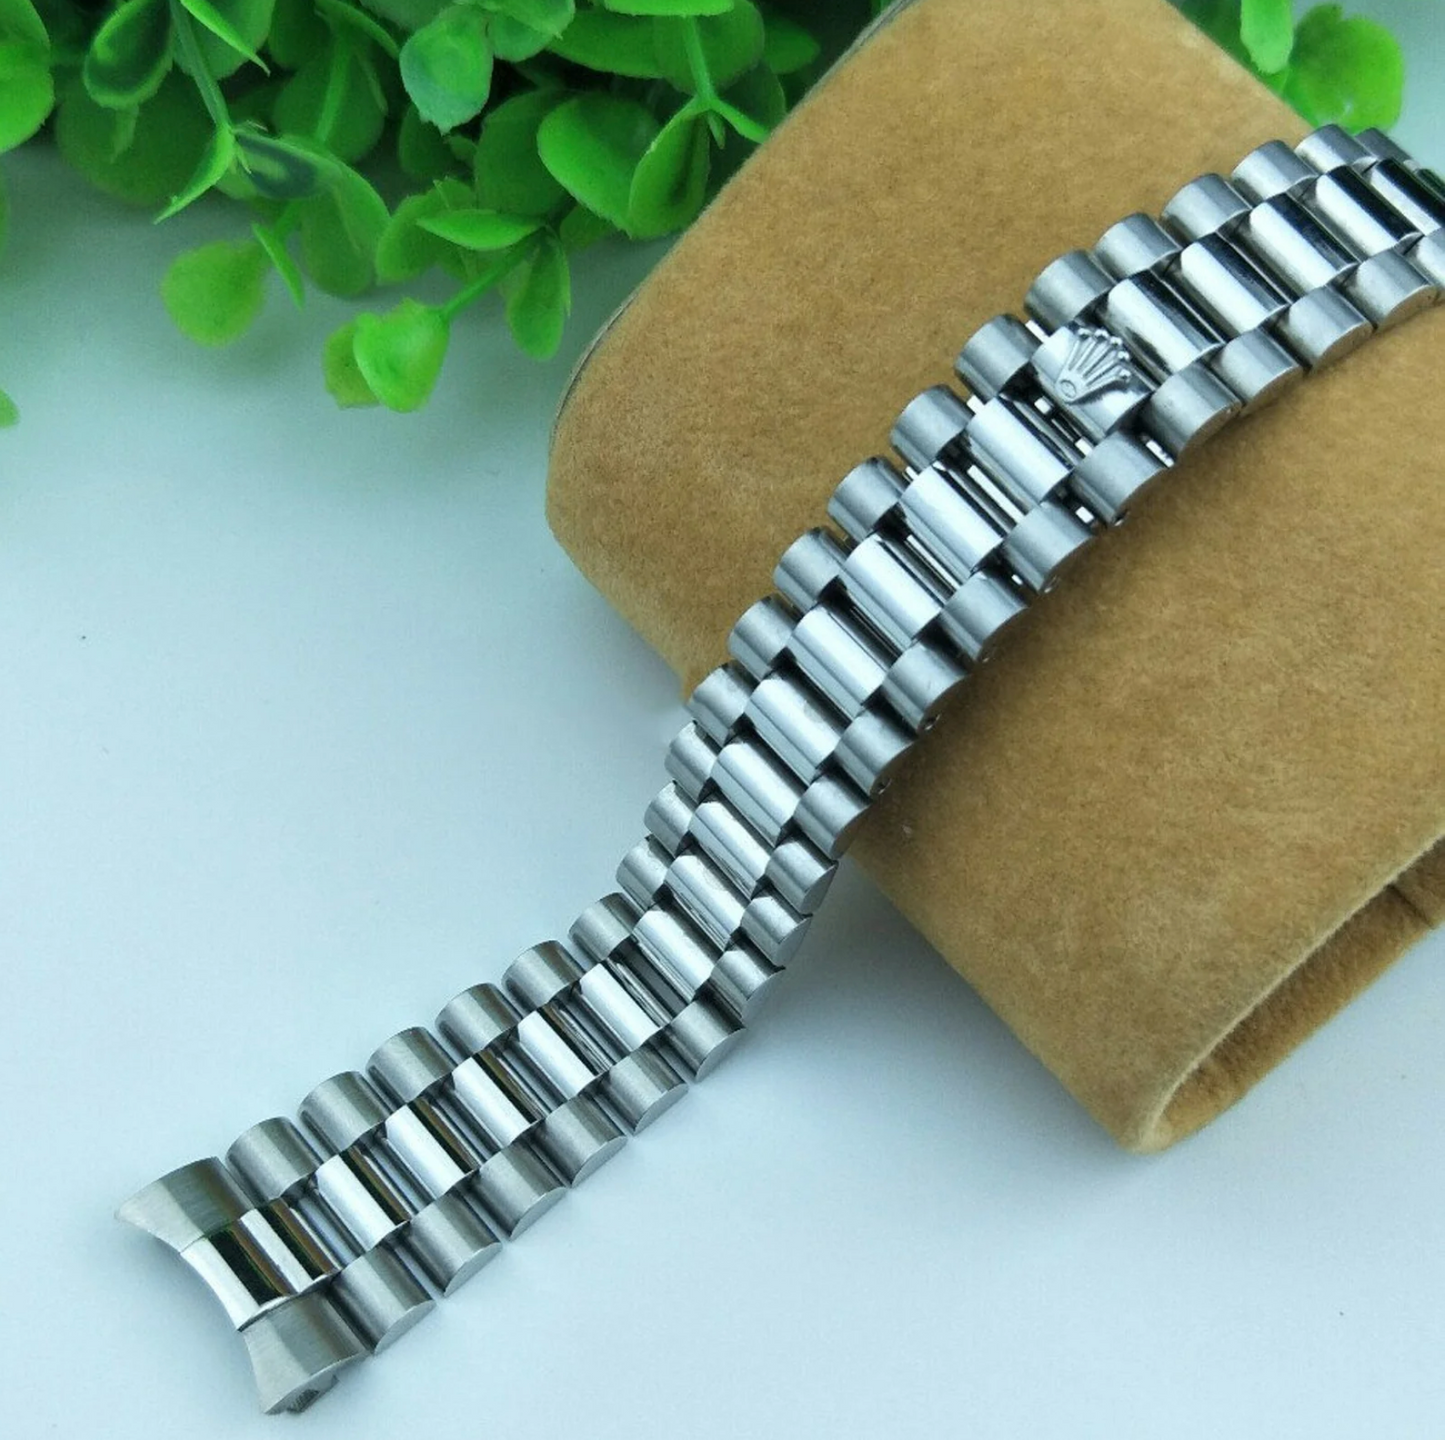 13mm/17mm/20mm Rolex President Steel Strap Rolex Oyster Bracelet Band For Rolex Datejust Series With Stainless Steel Folding Clasp Buckle